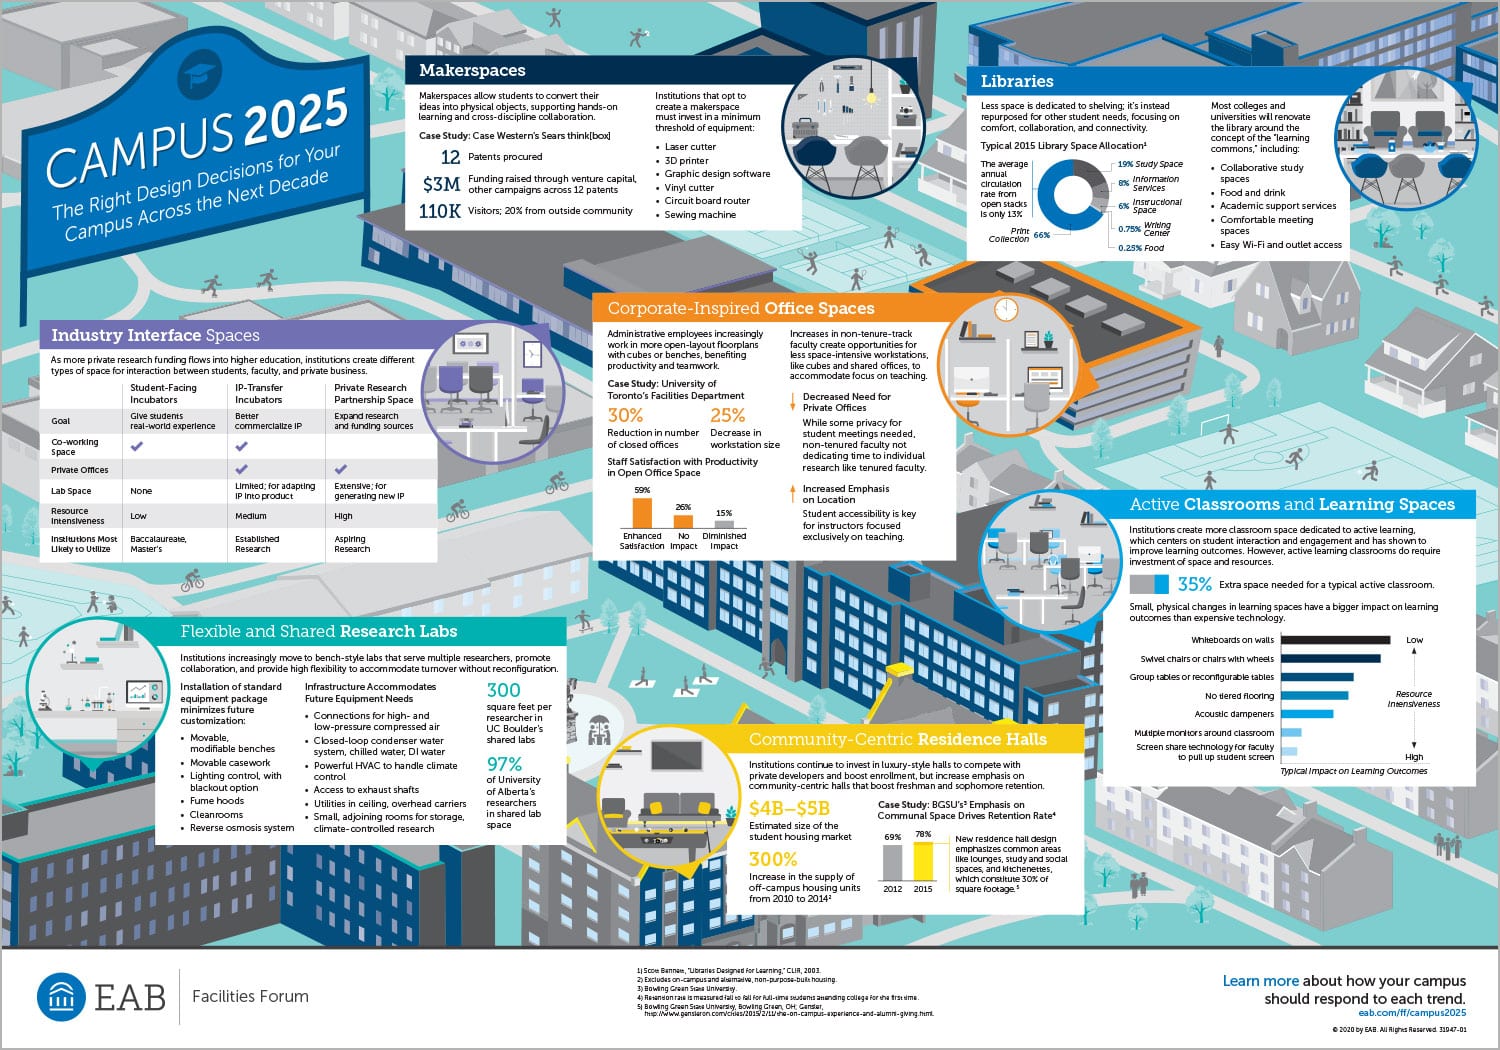 seven key trends for Campus 2025